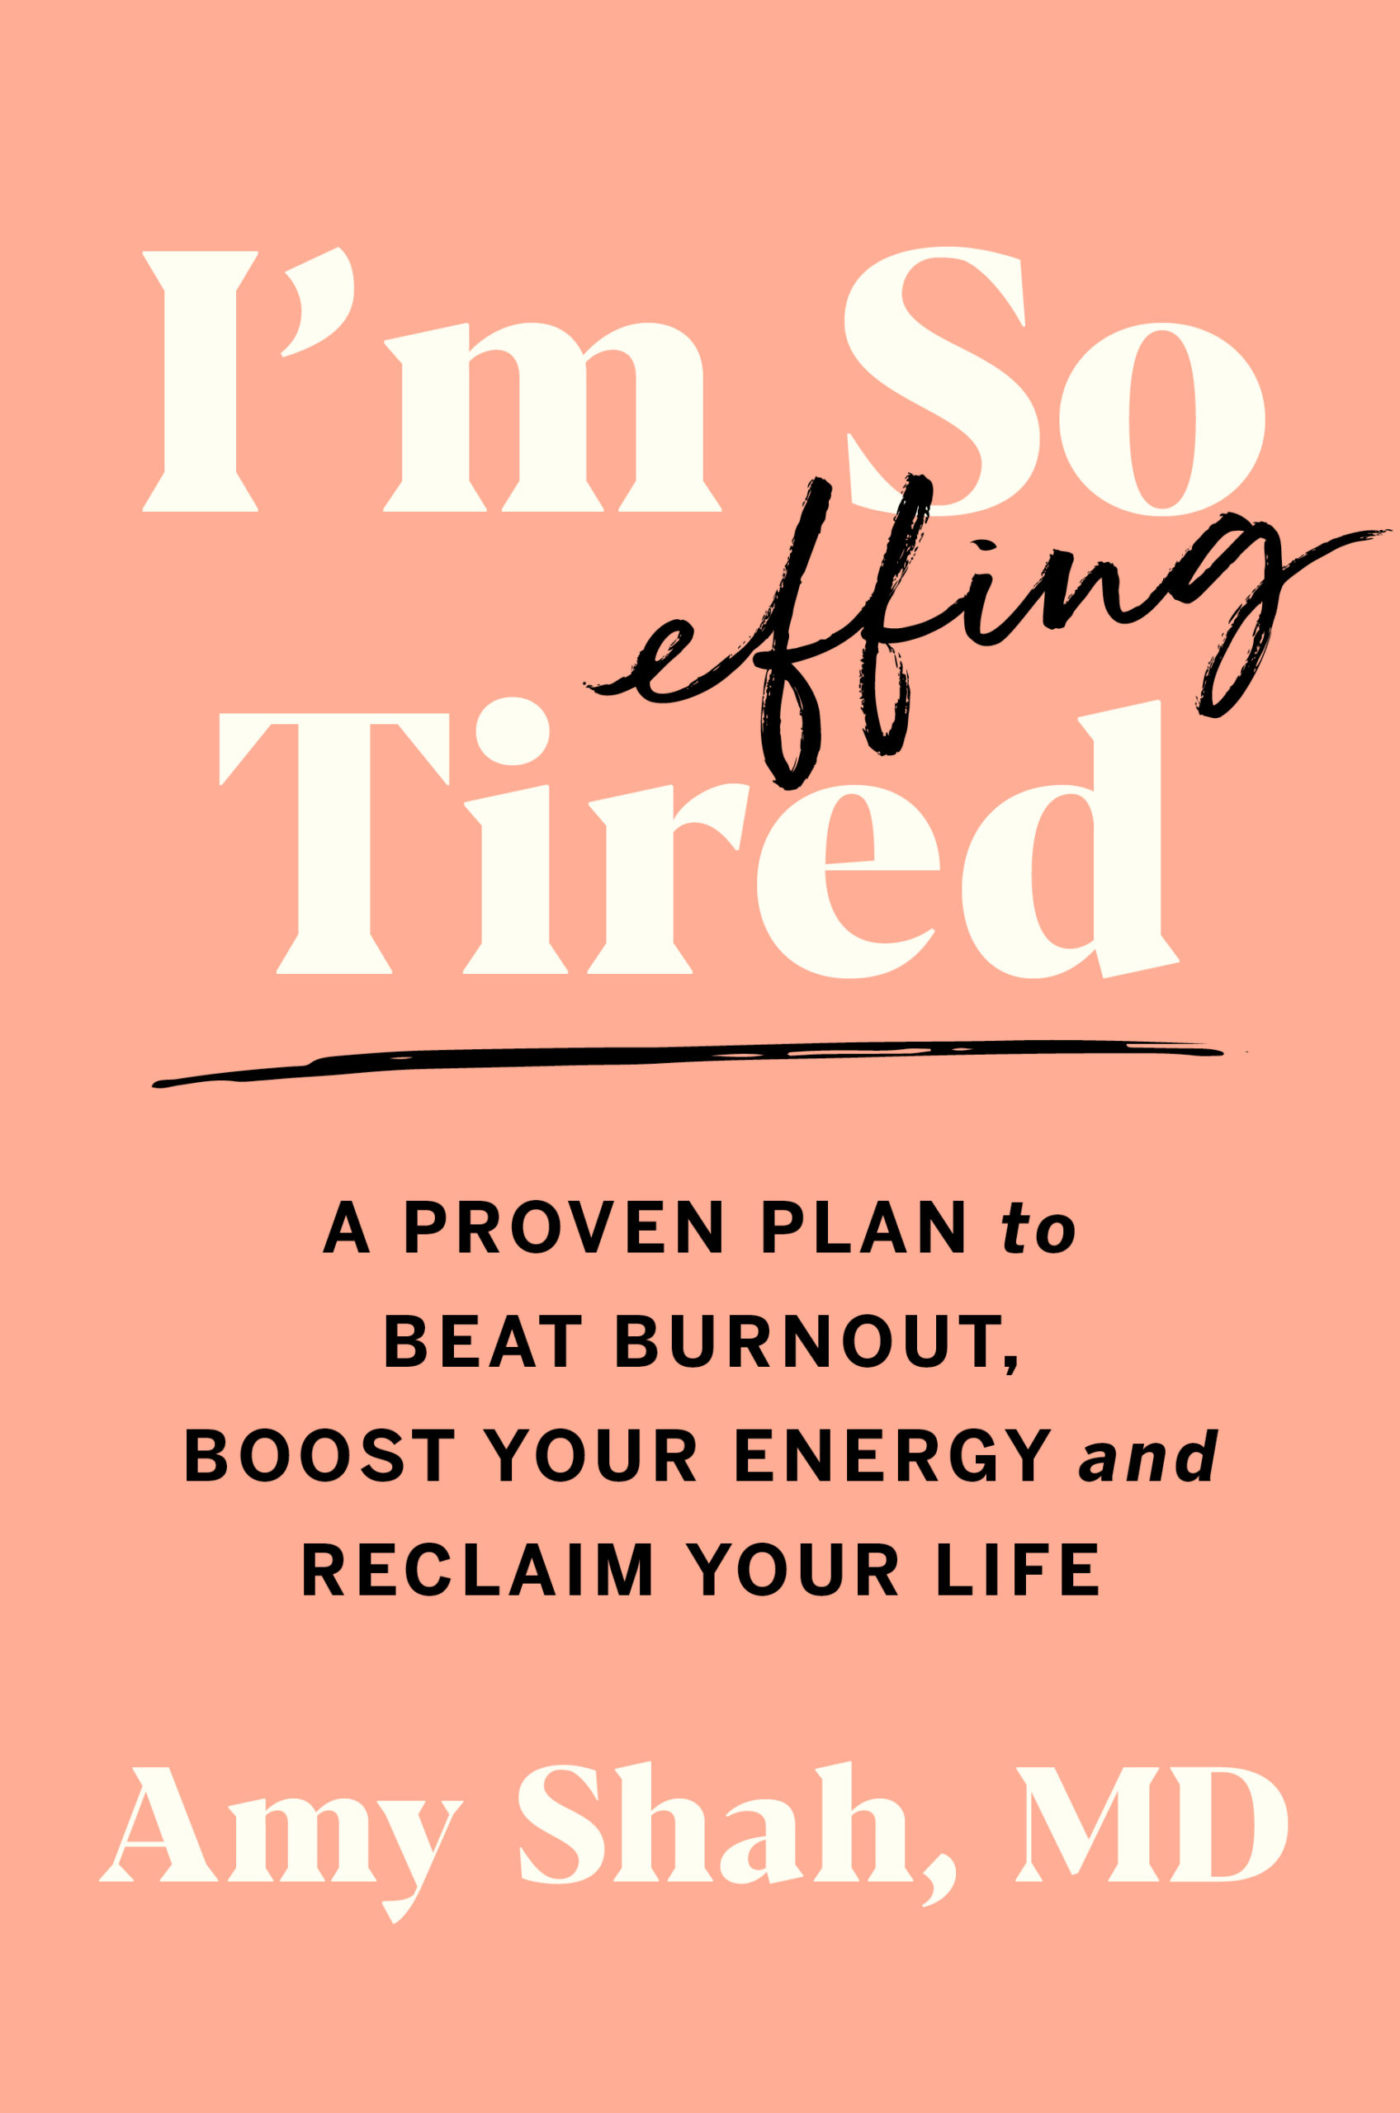 Dr. Amy Shah Tells Us Why Exhaustion Doesn't Have To Be Your New Normal In Her Latest Book "I'm So Effing Tired"